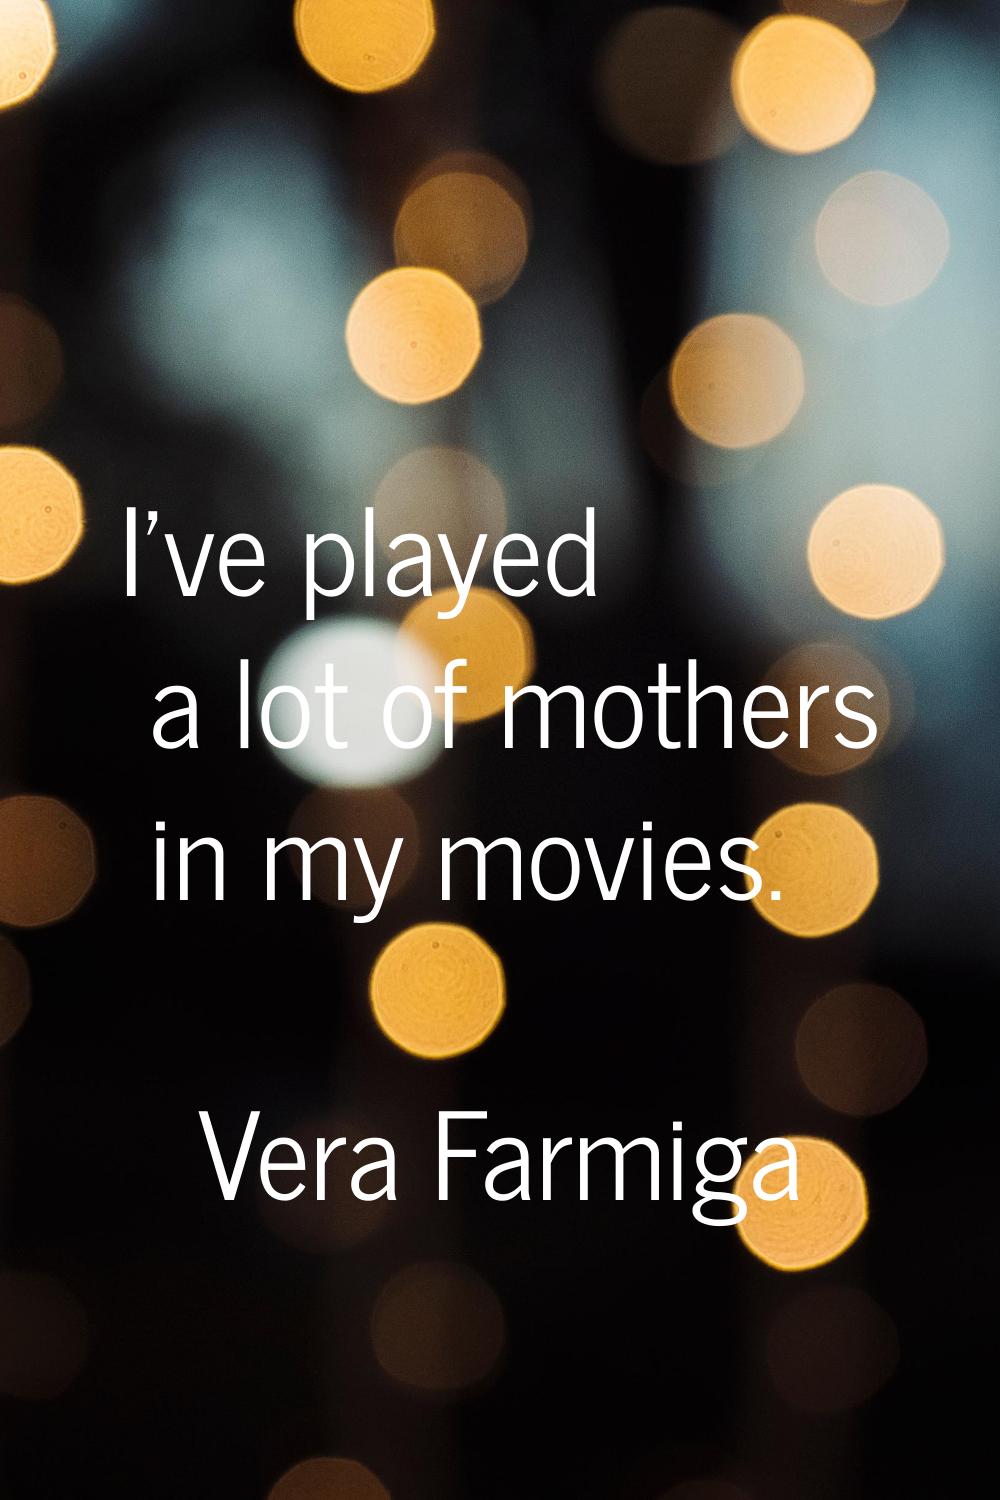 I've played a lot of mothers in my movies.